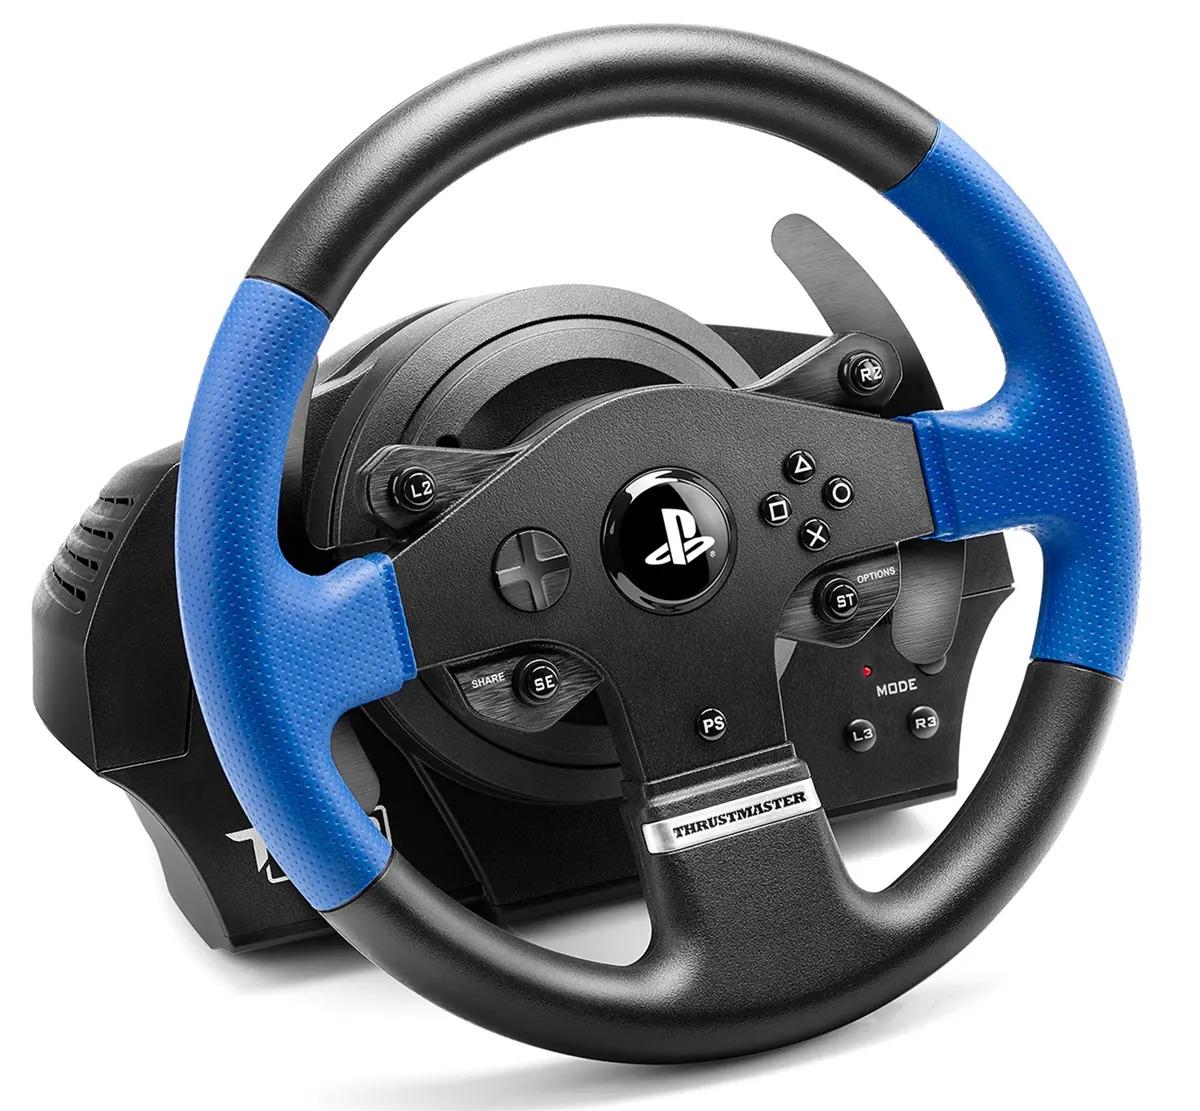 Thrustmaster T150 RS Racing Wheel and Pedals for $129.98 Shipped